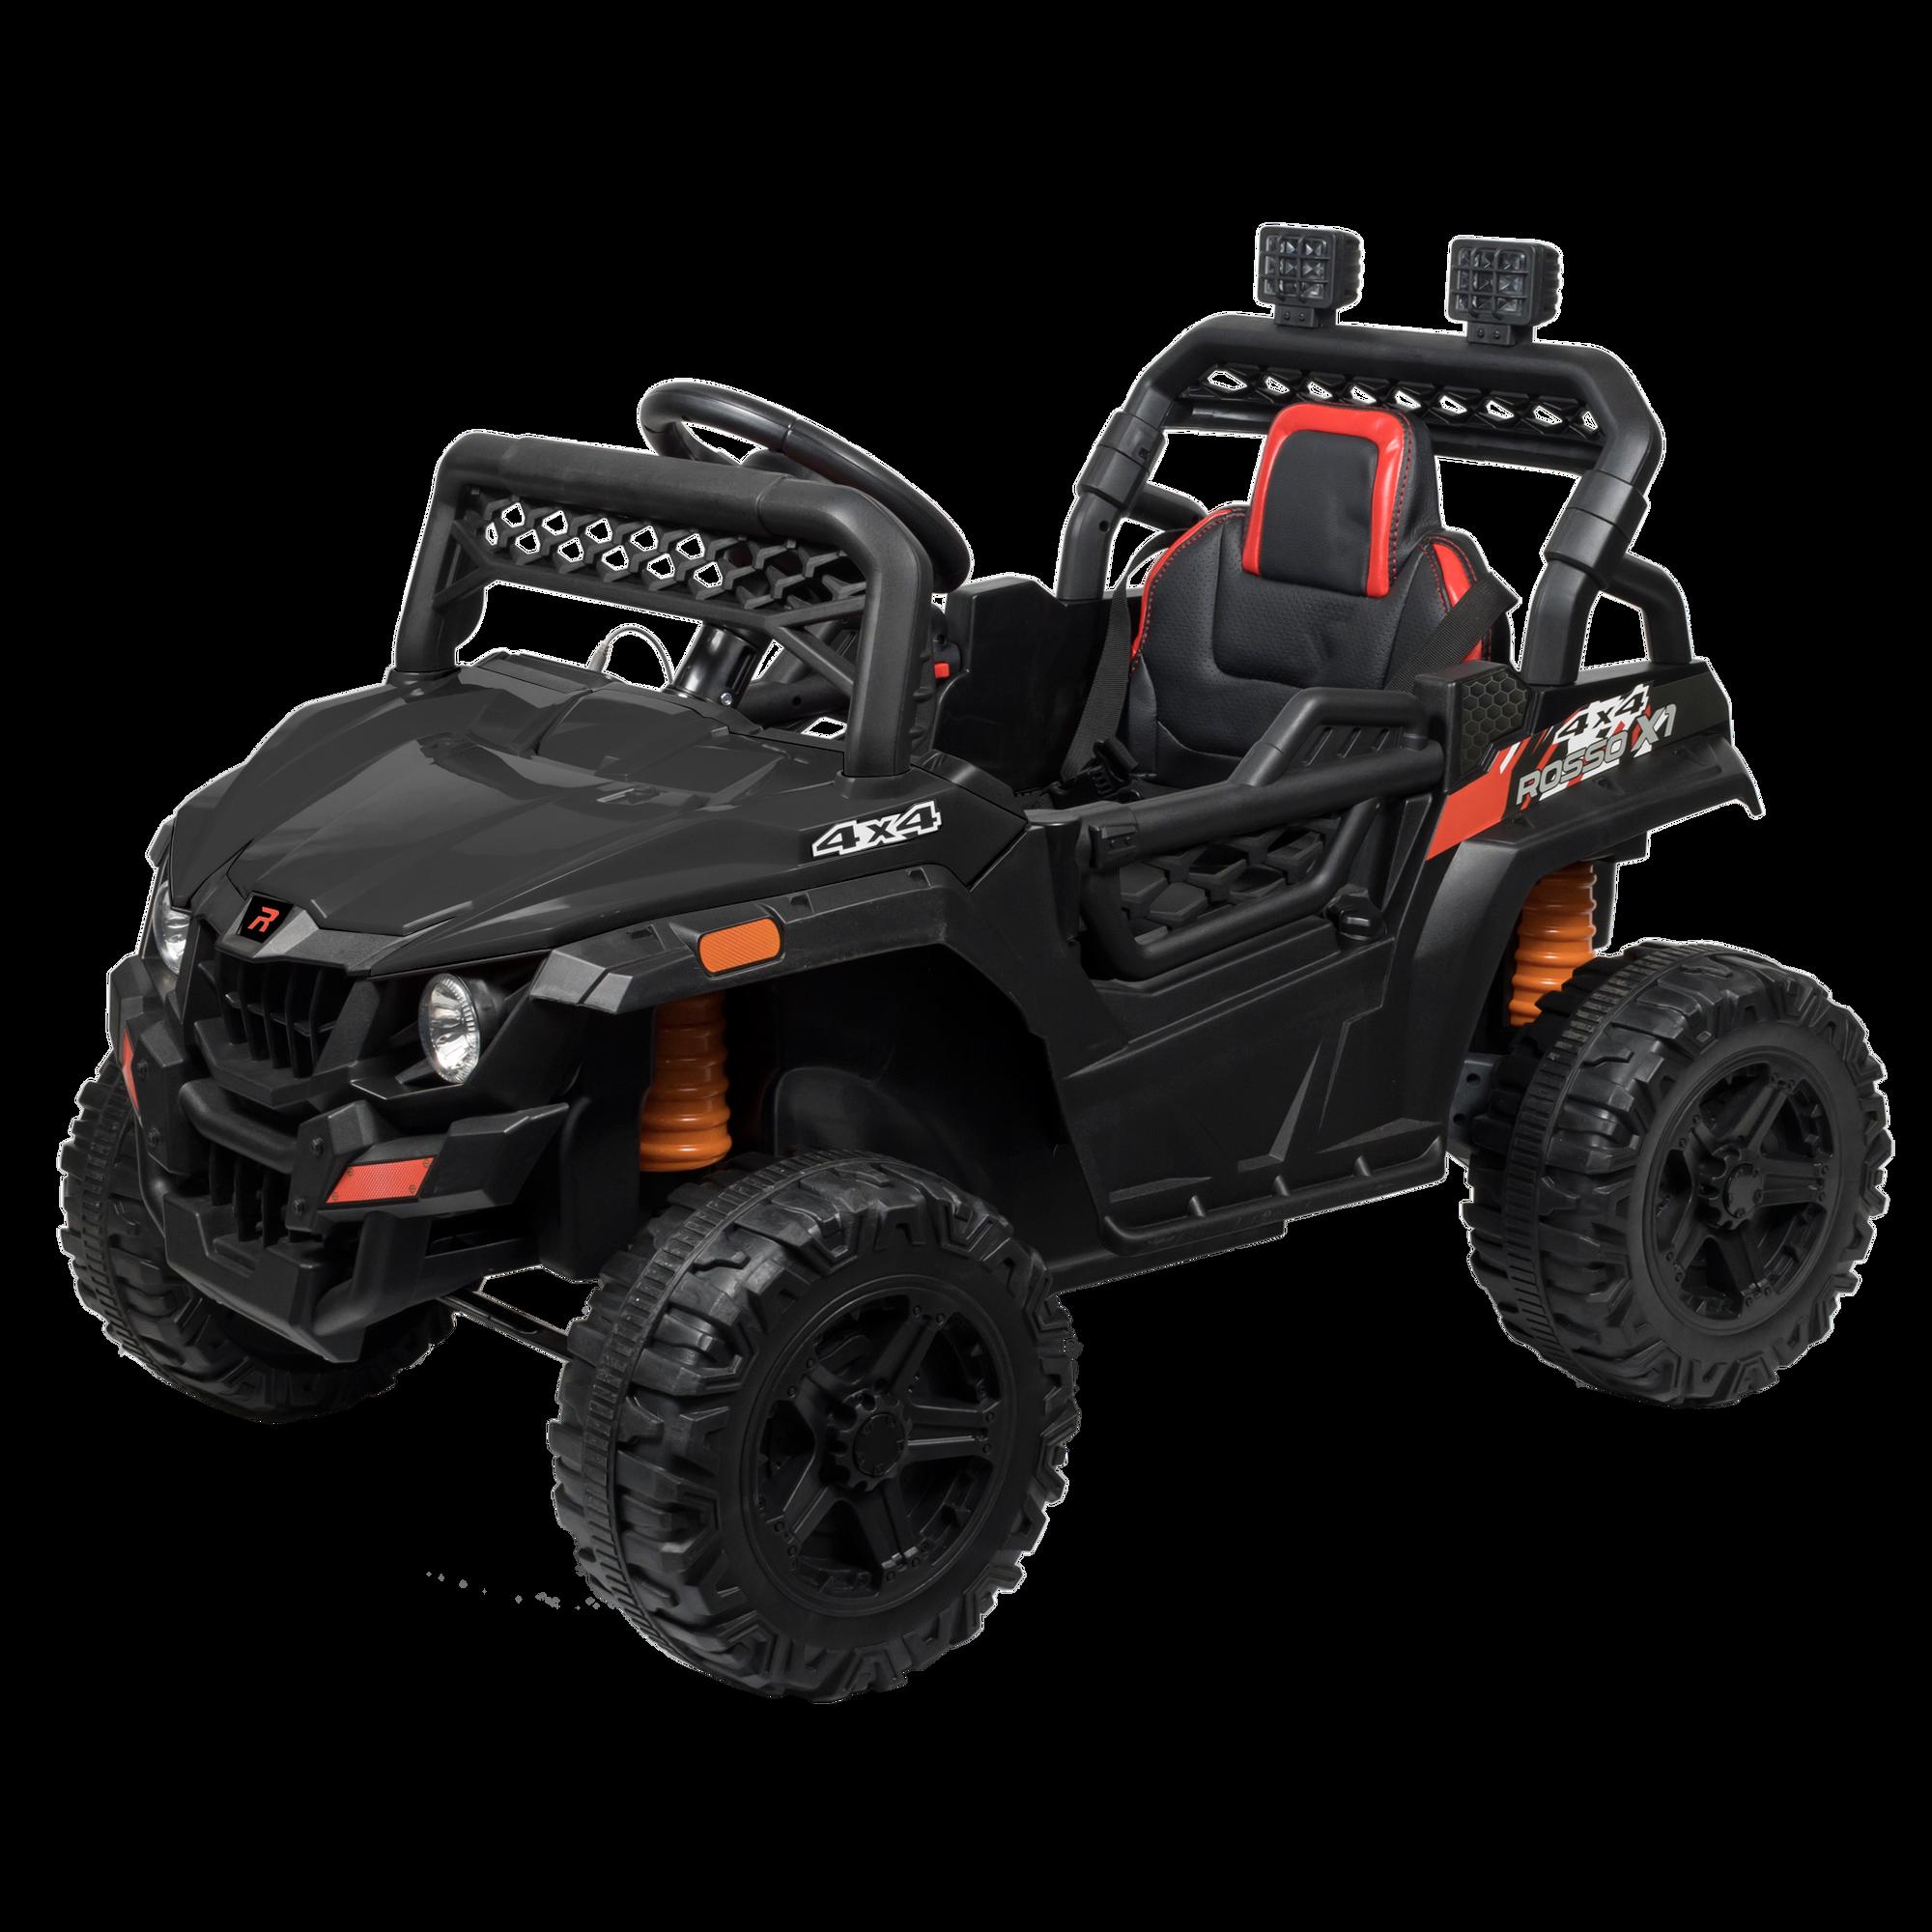 Remote Control 4 Wheeler: Choosing the Right Remote Control Vehicle for Your Needs